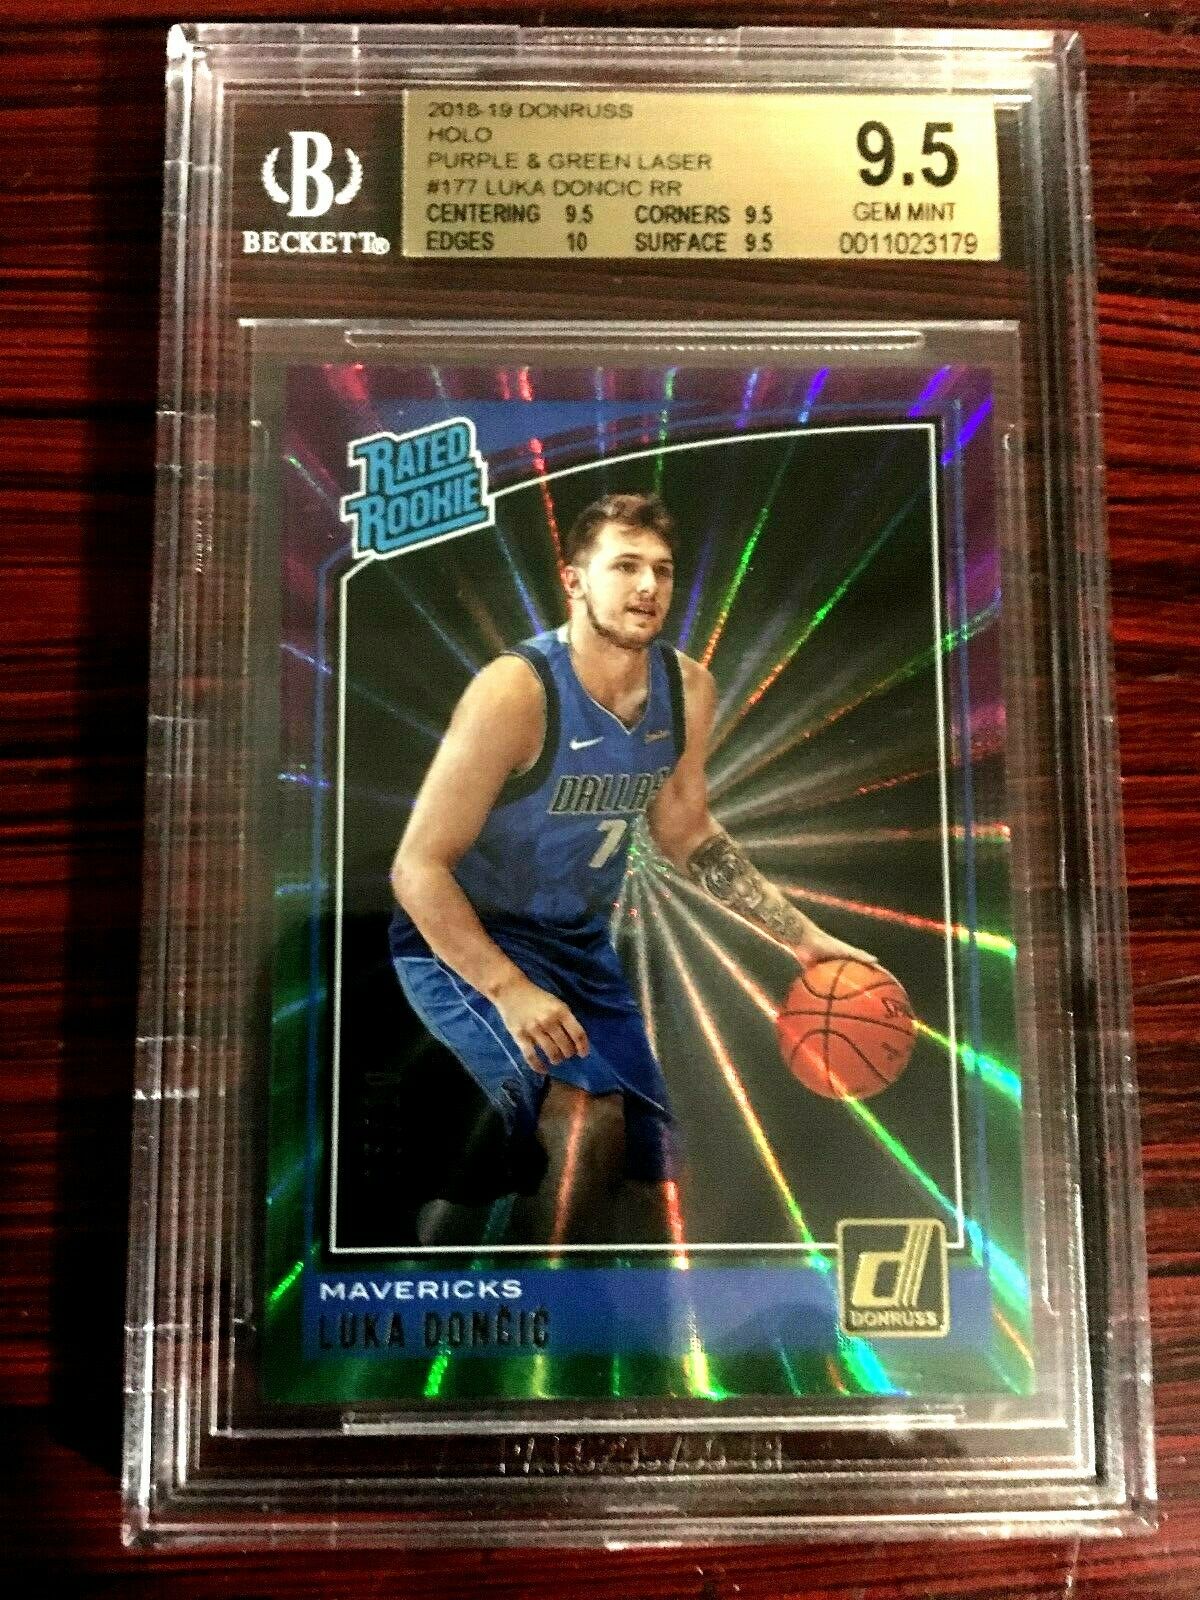 Curious why this luka doncic prizm base rookie is so valuable even